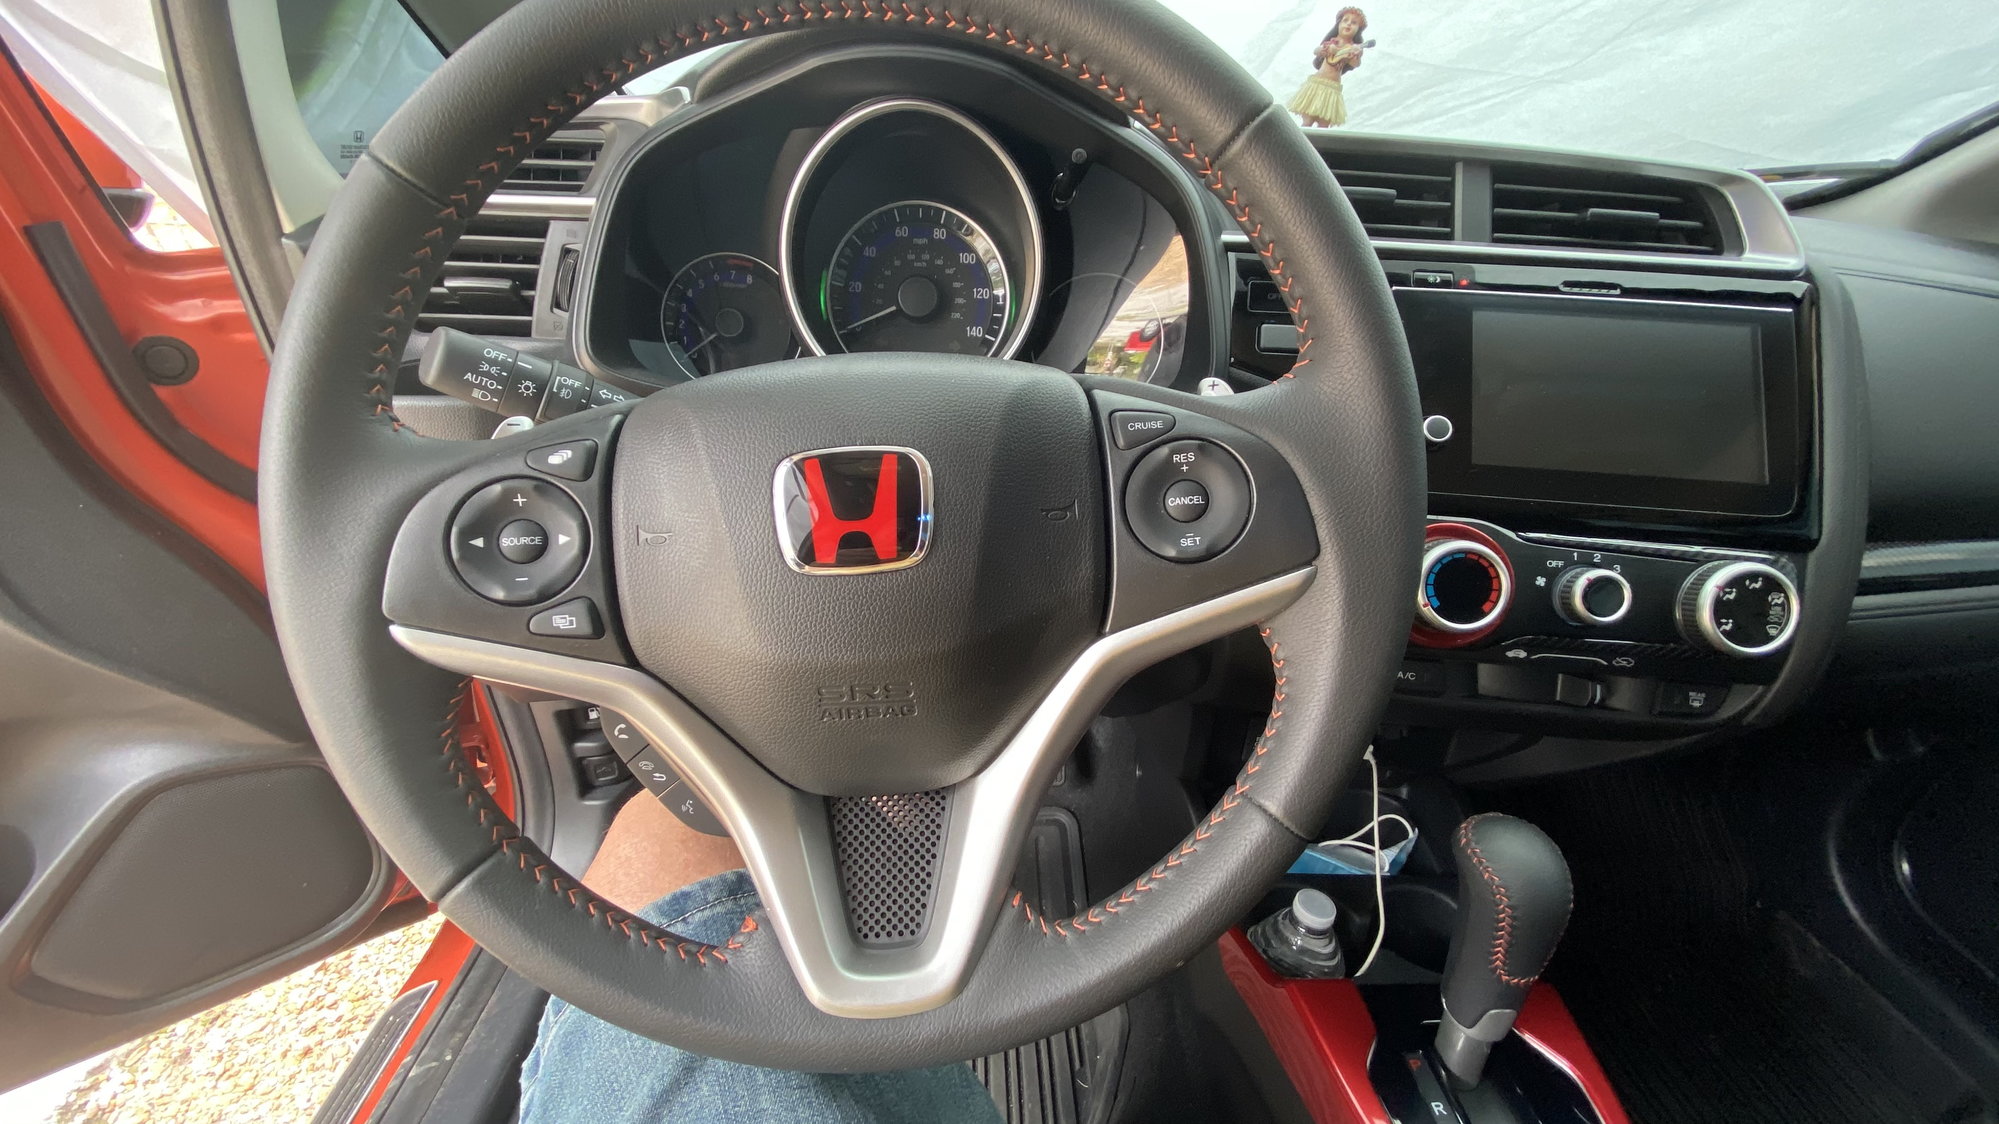 Steering Wheel Cover - Page 3 - Unofficial Honda FIT Forums